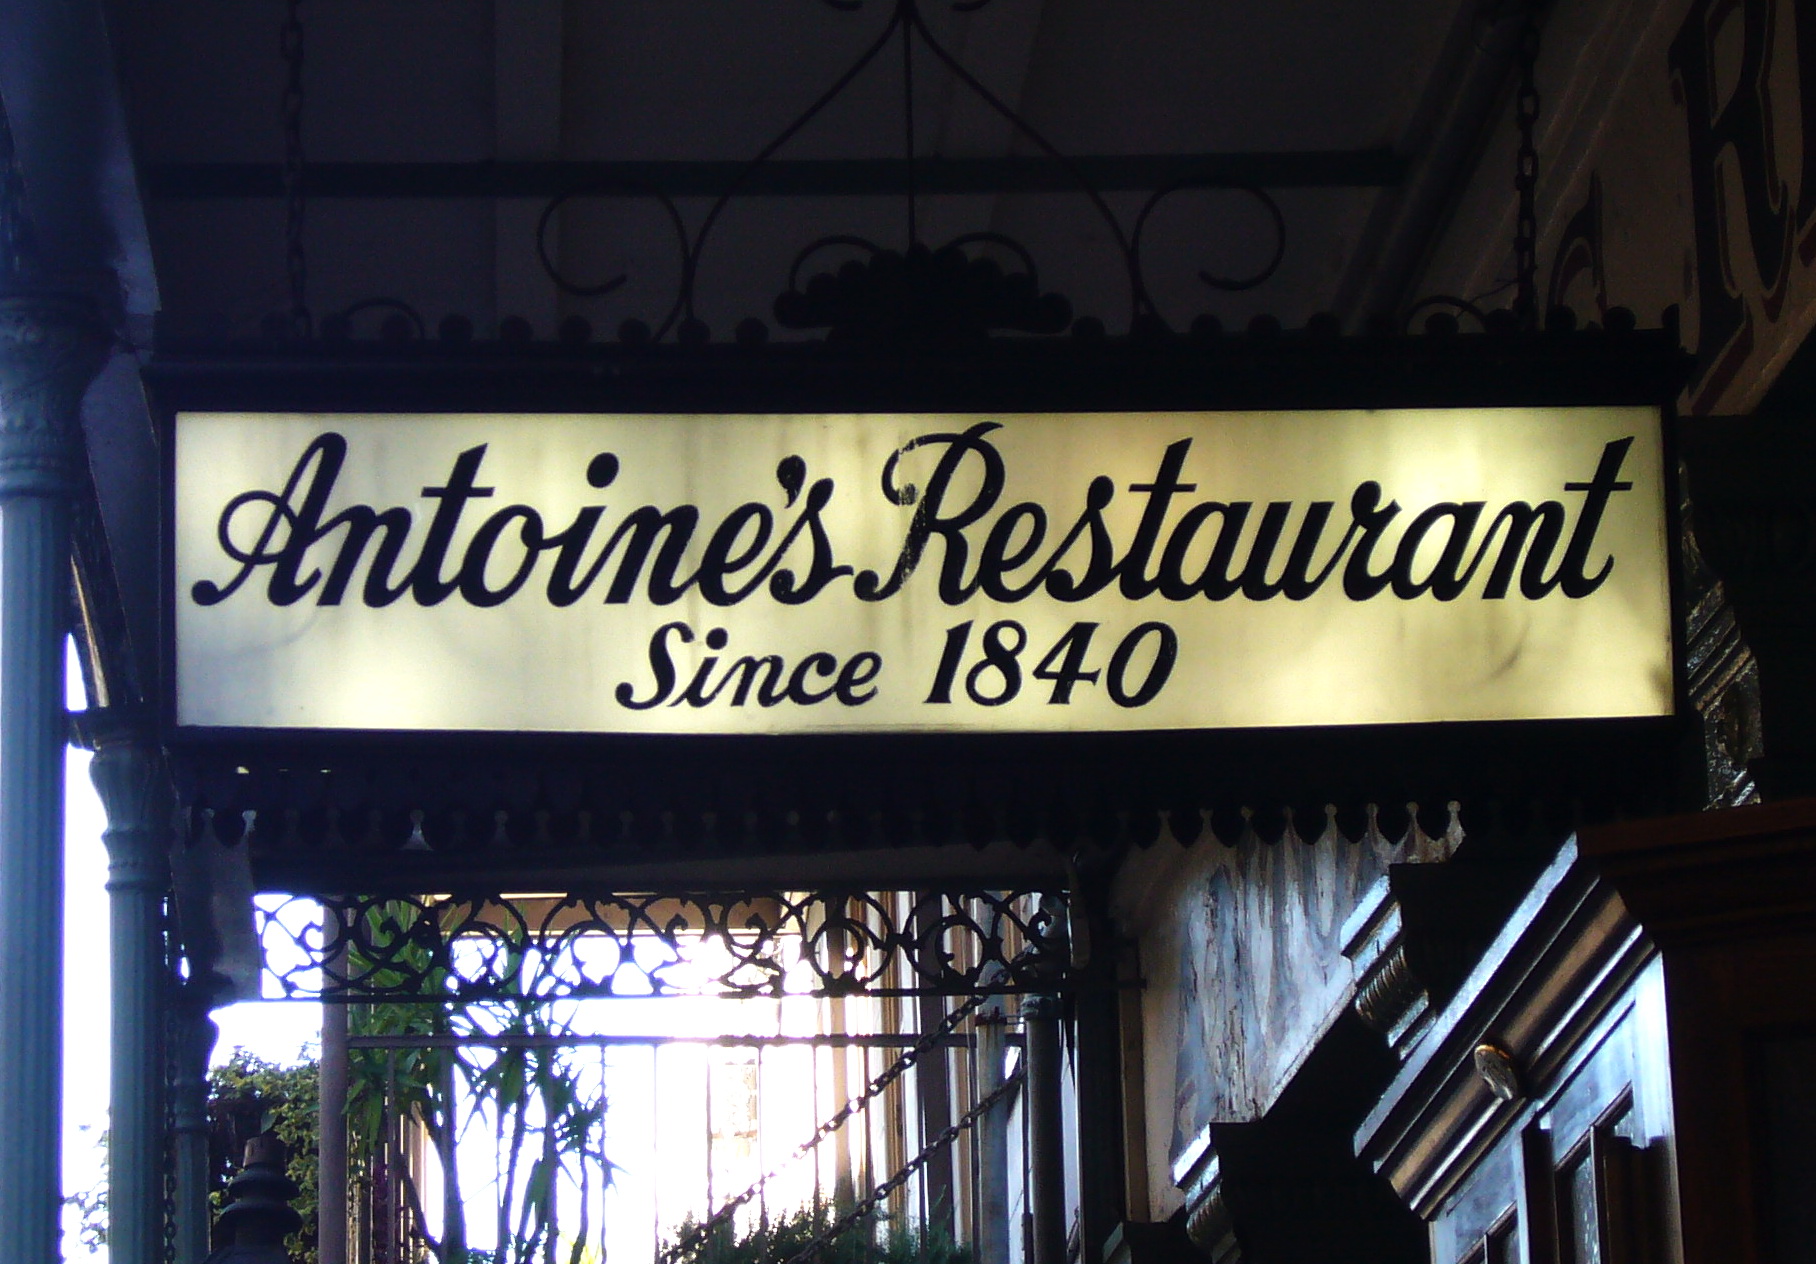 Antoines Restaurant in the French Quarter is the oldest continuously run restaurant in Louisiana, established in 1840.